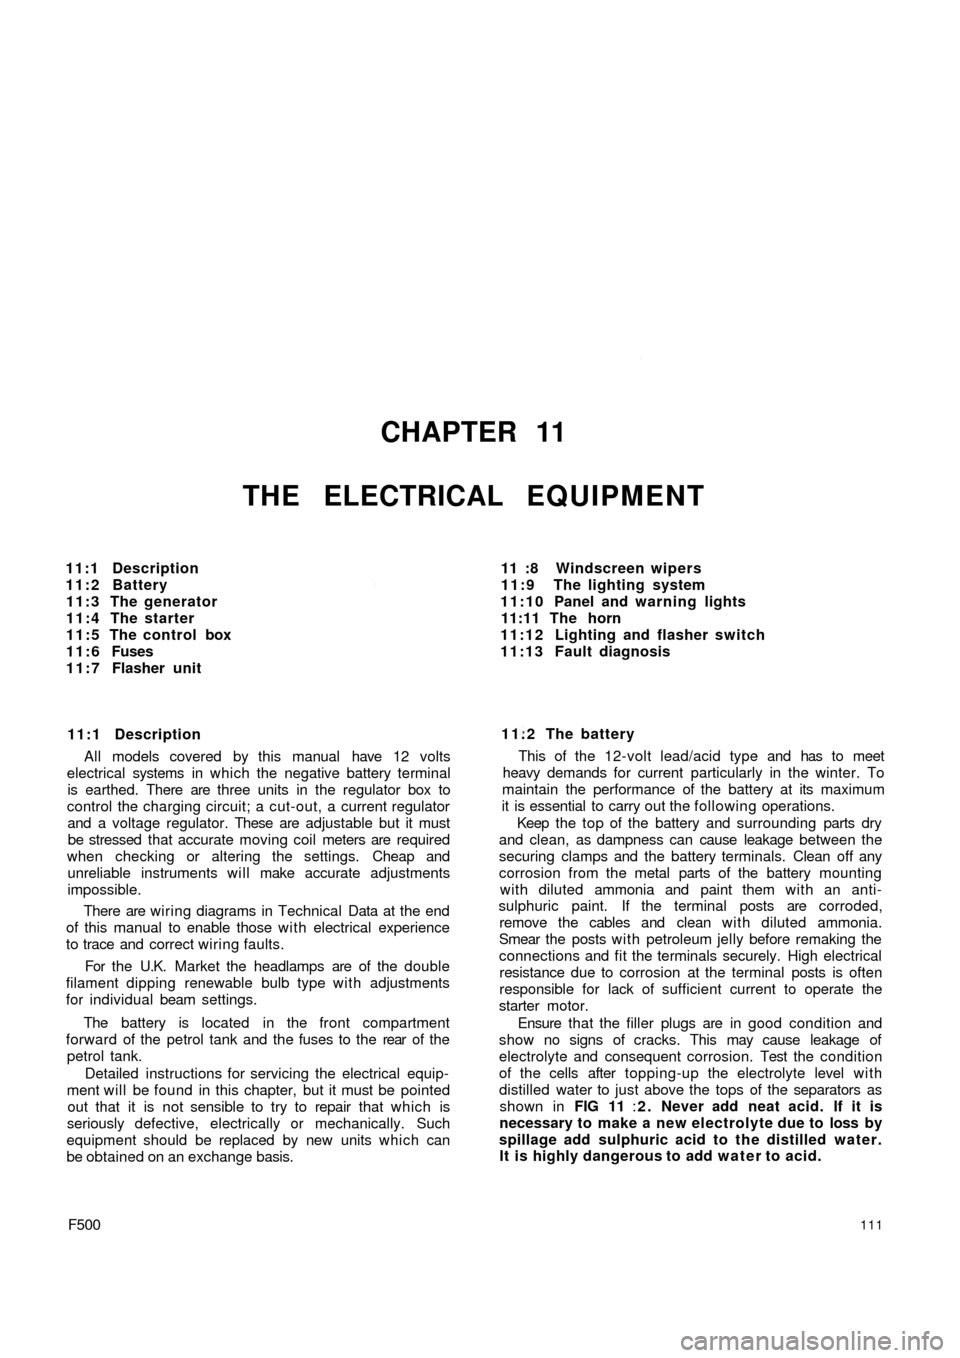 FIAT 500 1968 1.G Workshop Manual CHAPTER 11
THE ELECTRICAL EQUIPMENT
11:1 Description
11:2 Battery
11:3 The generator
11:4 The starter
11:5 The control box
1 1 : 6 Fuses
1 1 : 7 Flasher unit
11:1 Description
All models covered by thi